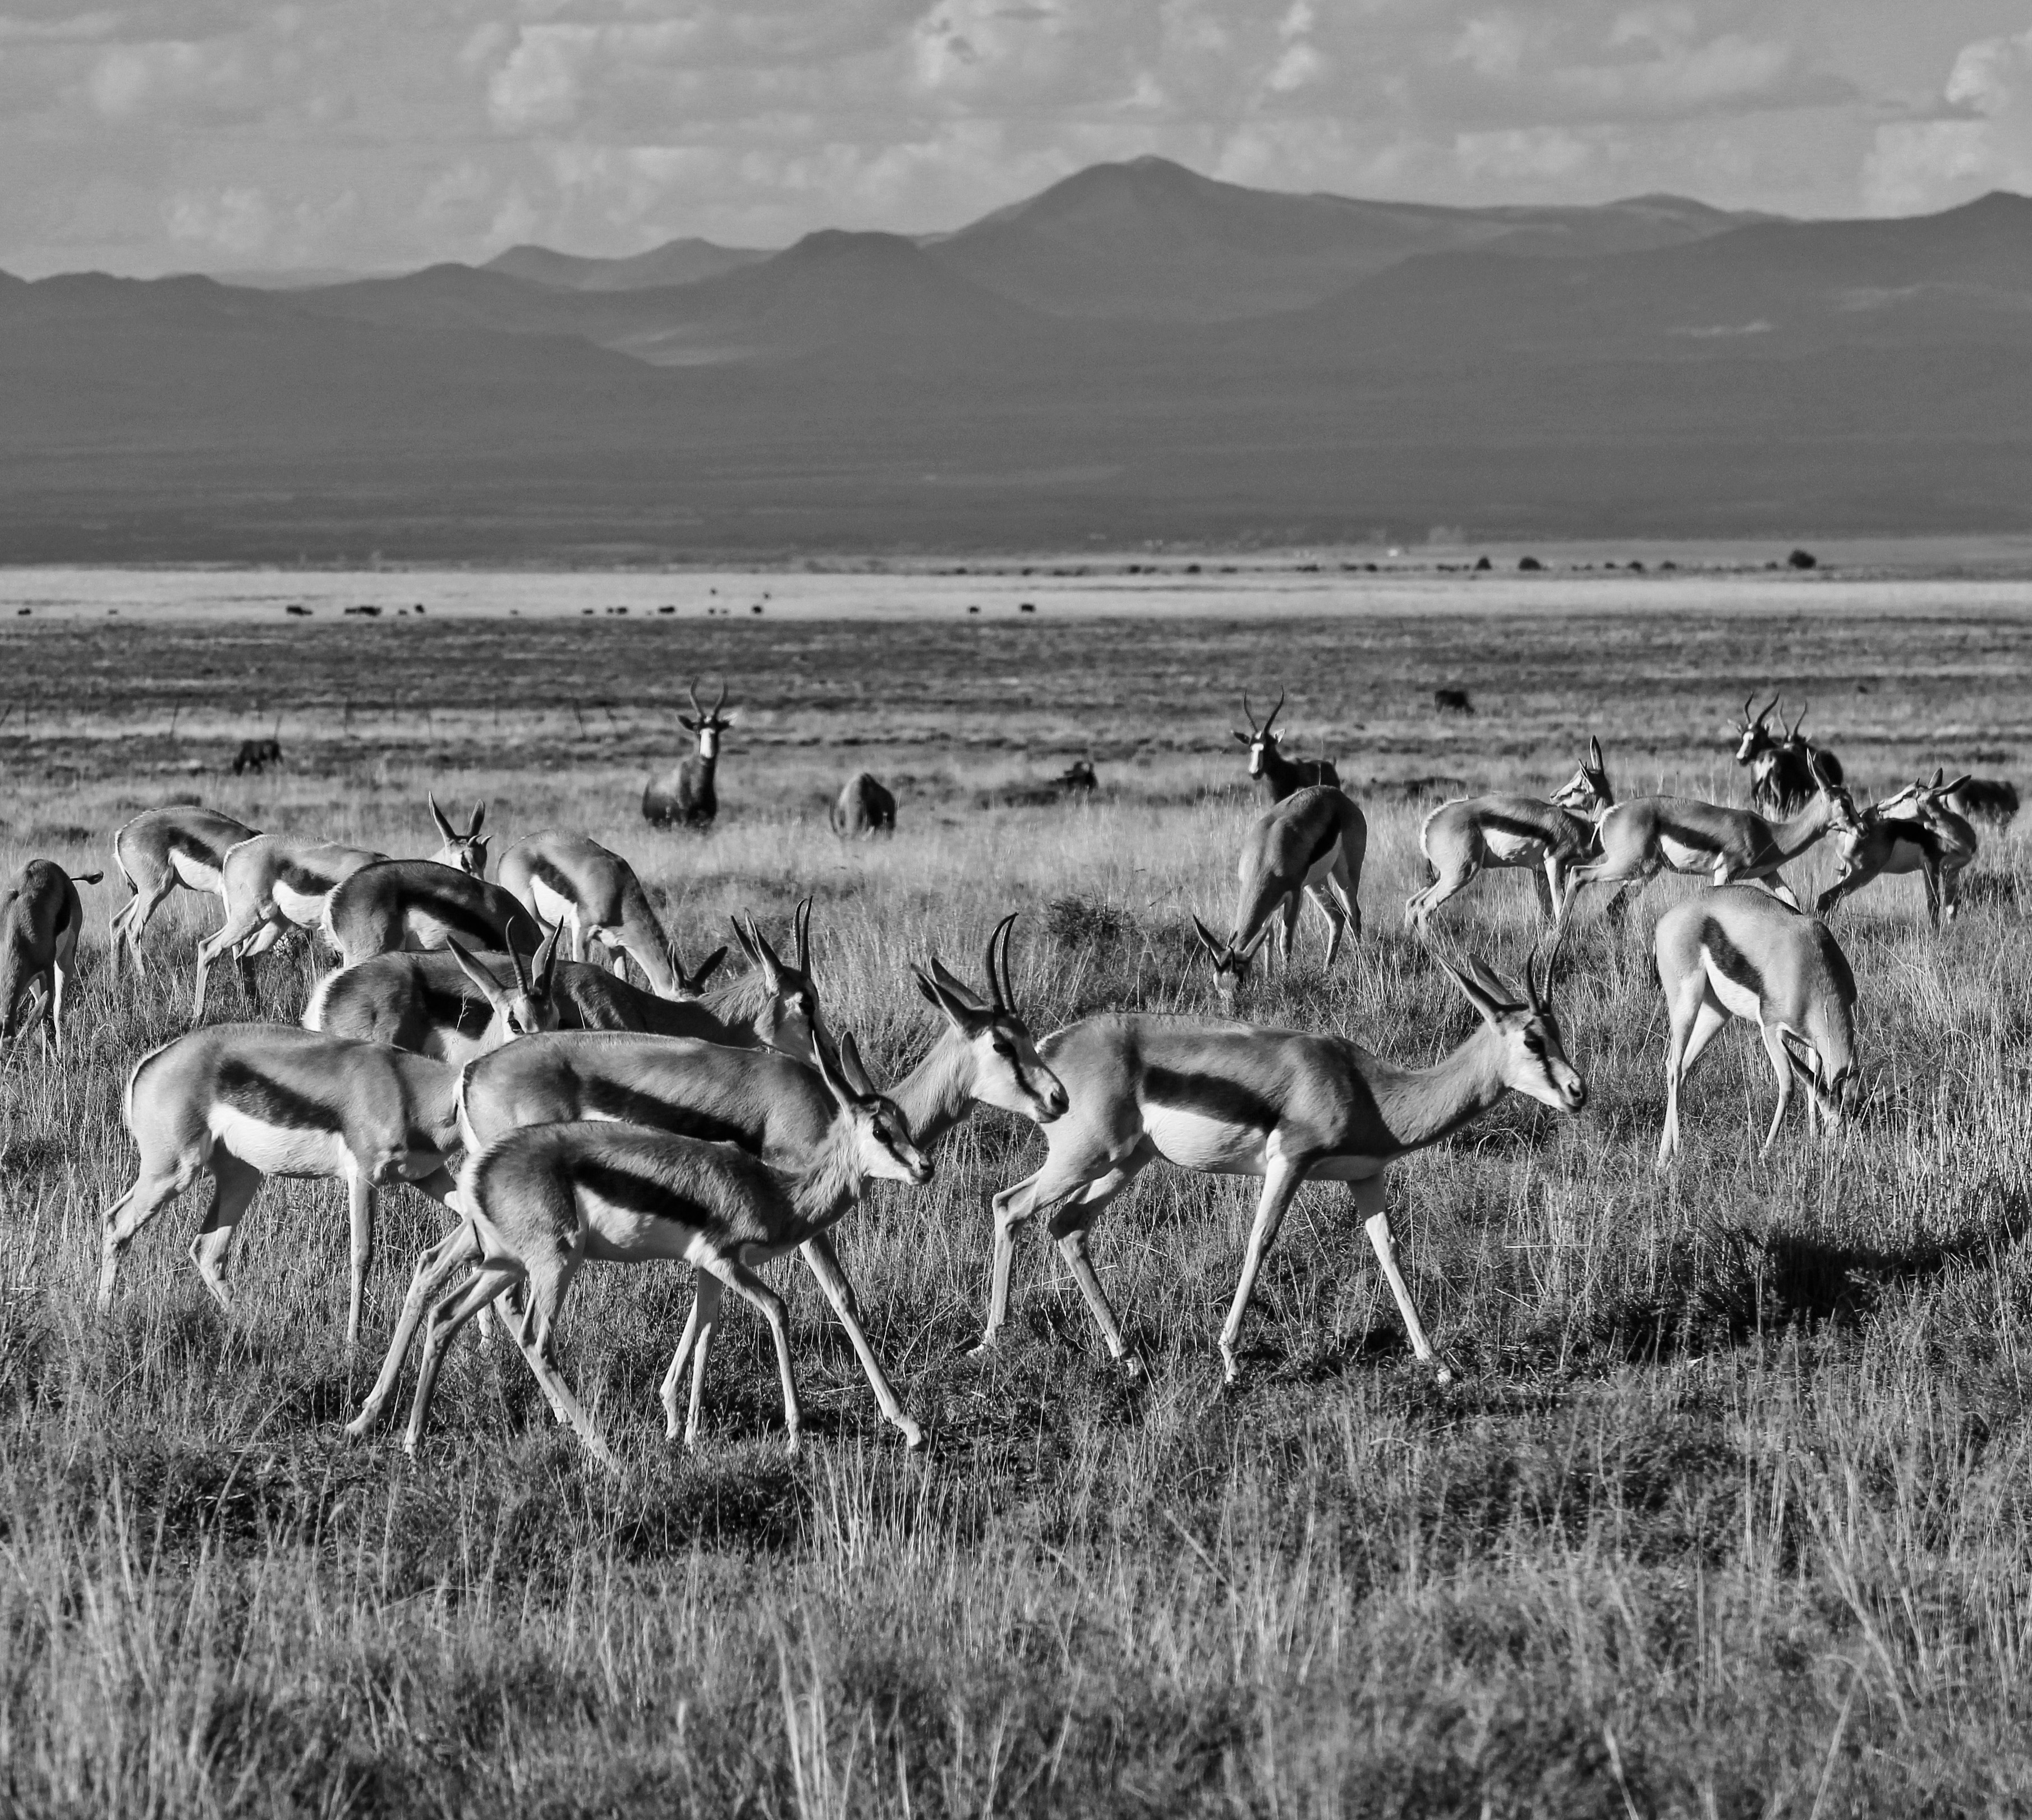 A mere sampling of the springbok that once crossed the Karoo plains in their millions. Photograph by Chris Marais.